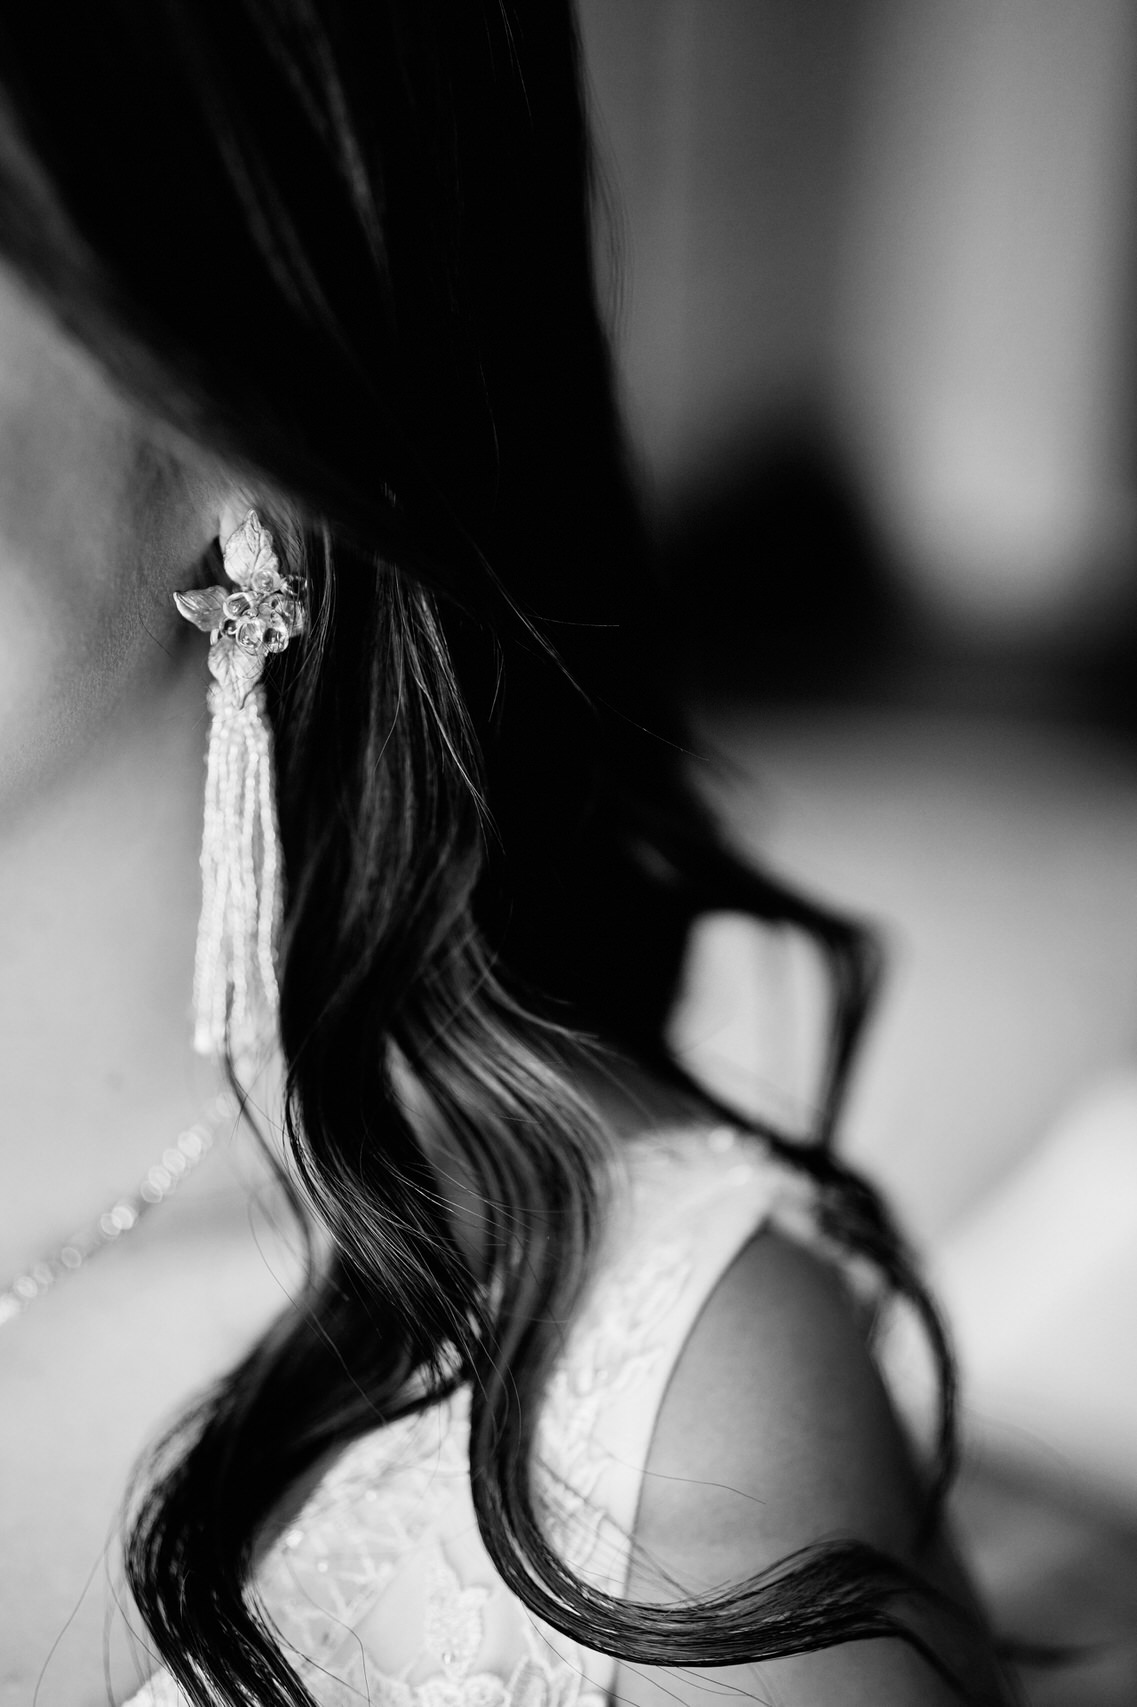 A picture in black and white of a bride with earrings on.